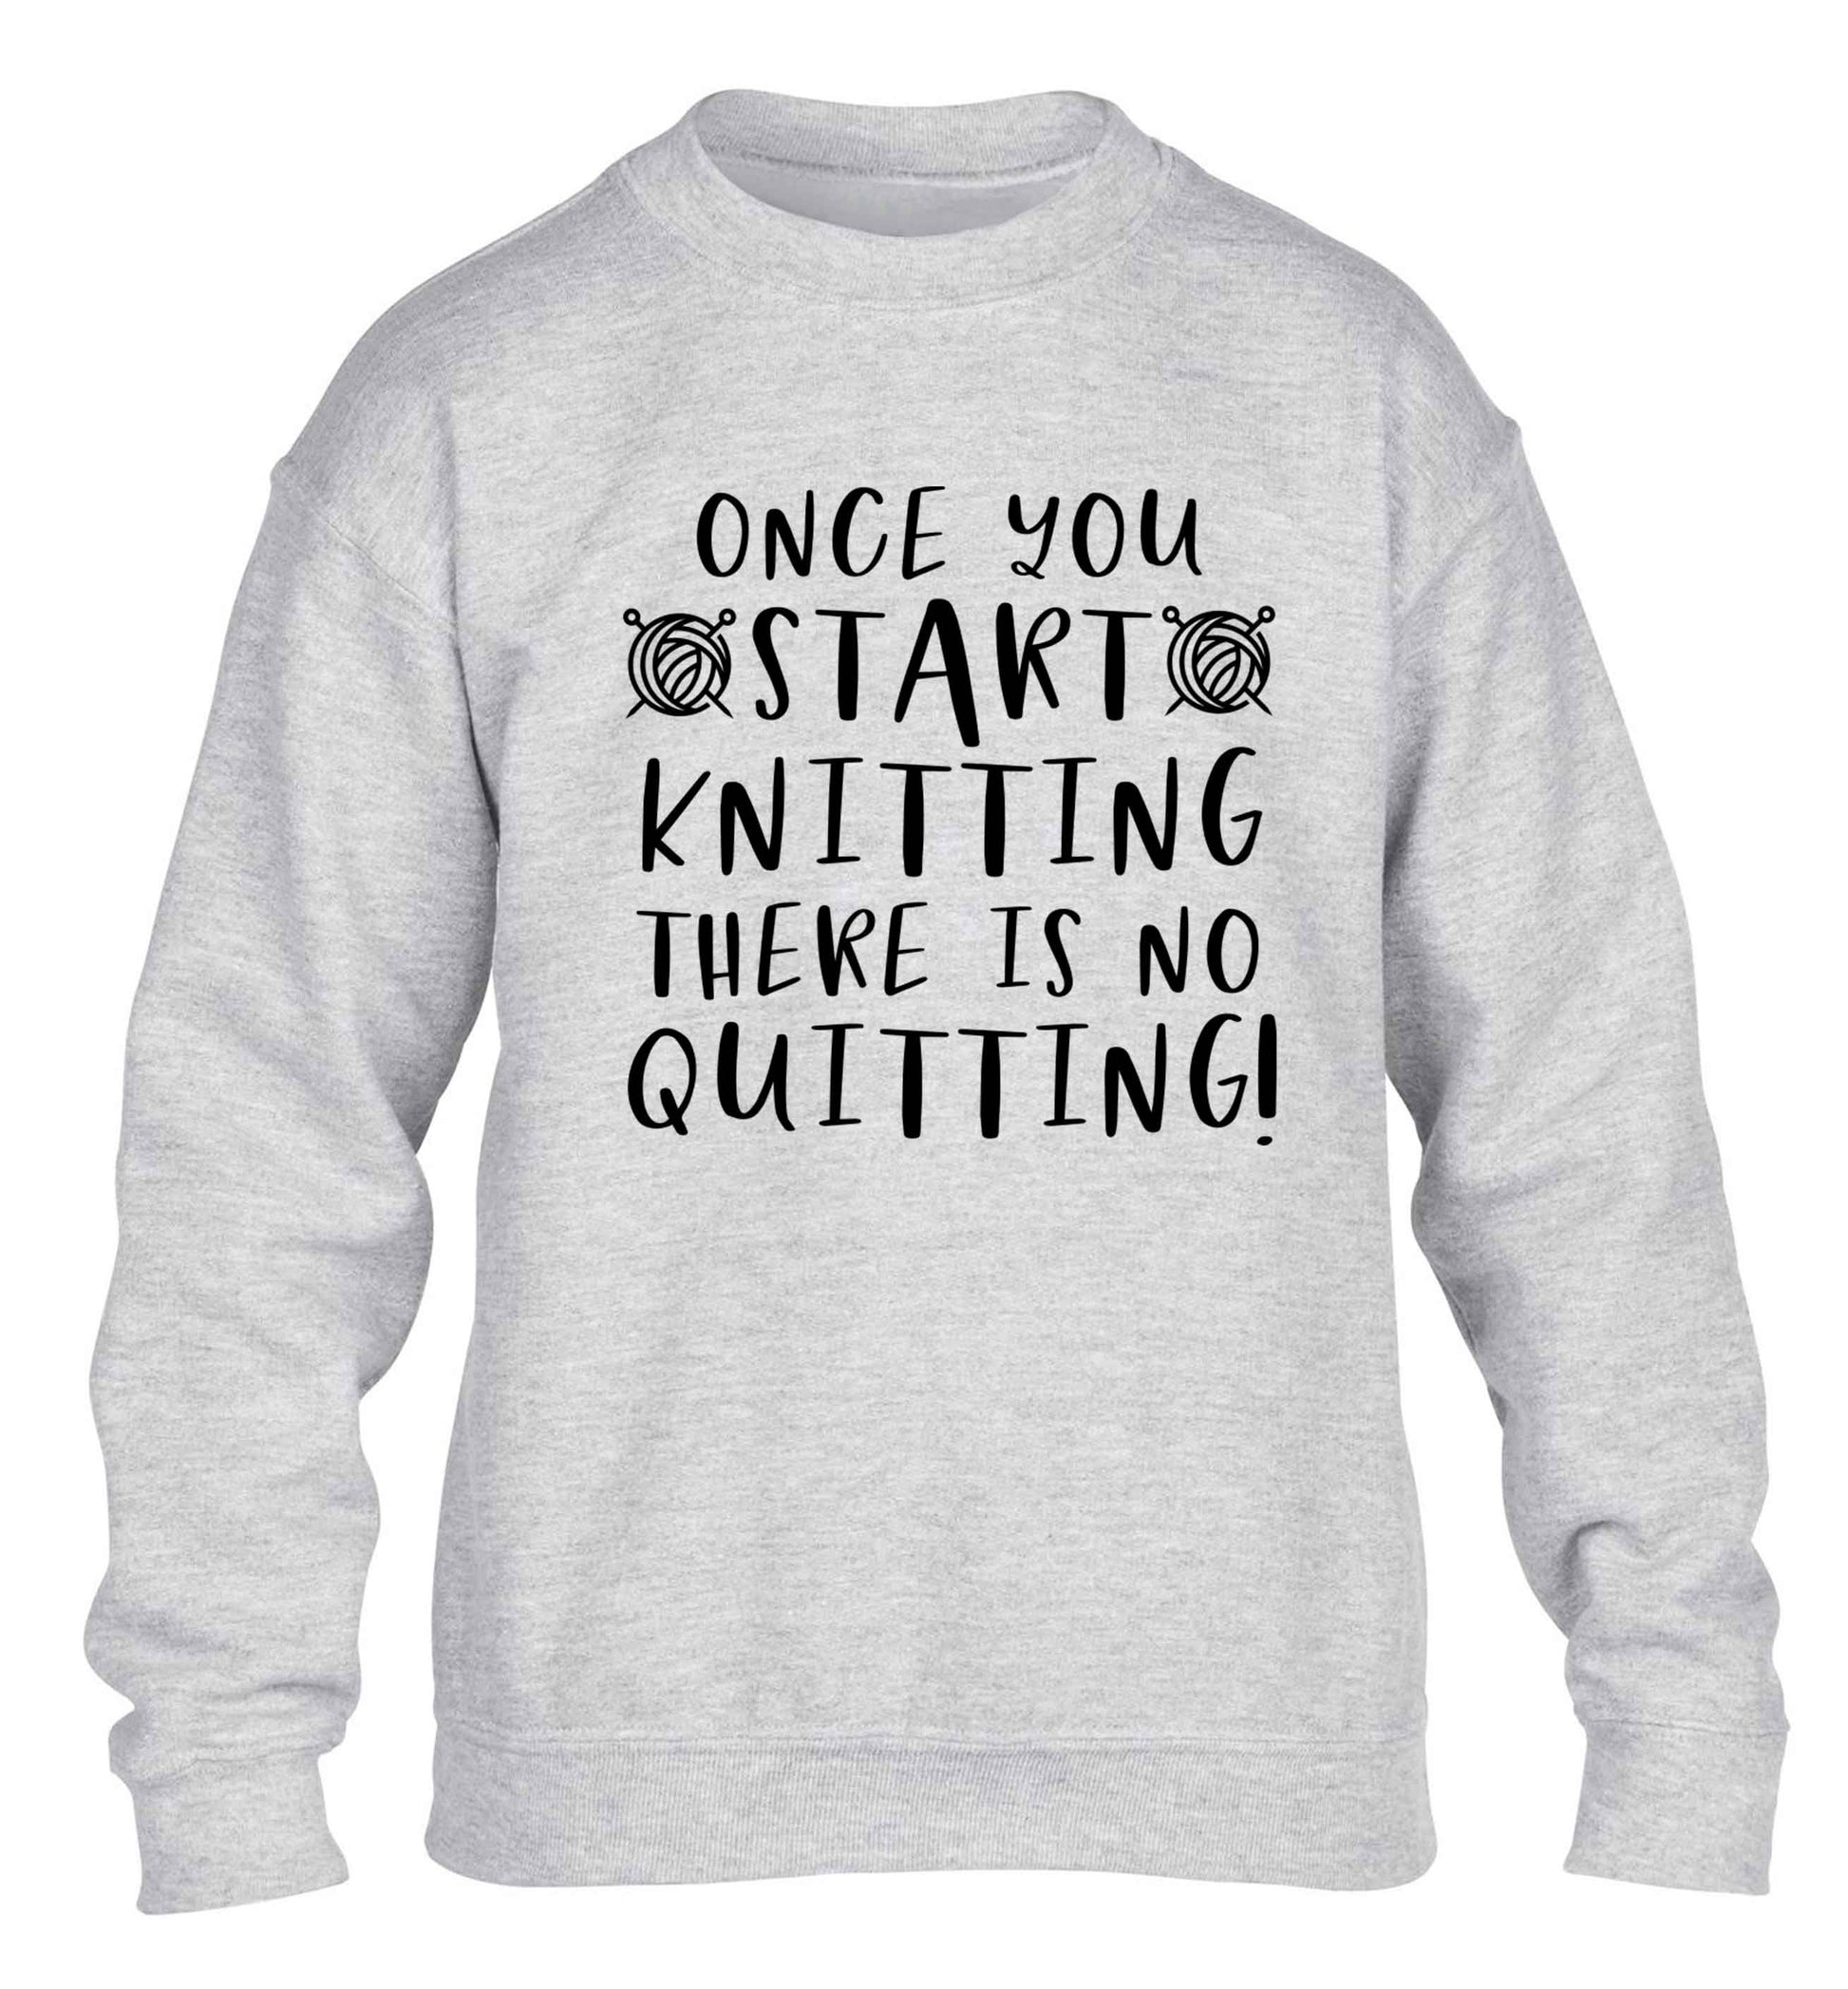 Once you start knitting there is no quitting! children's grey sweater 12-13 Years